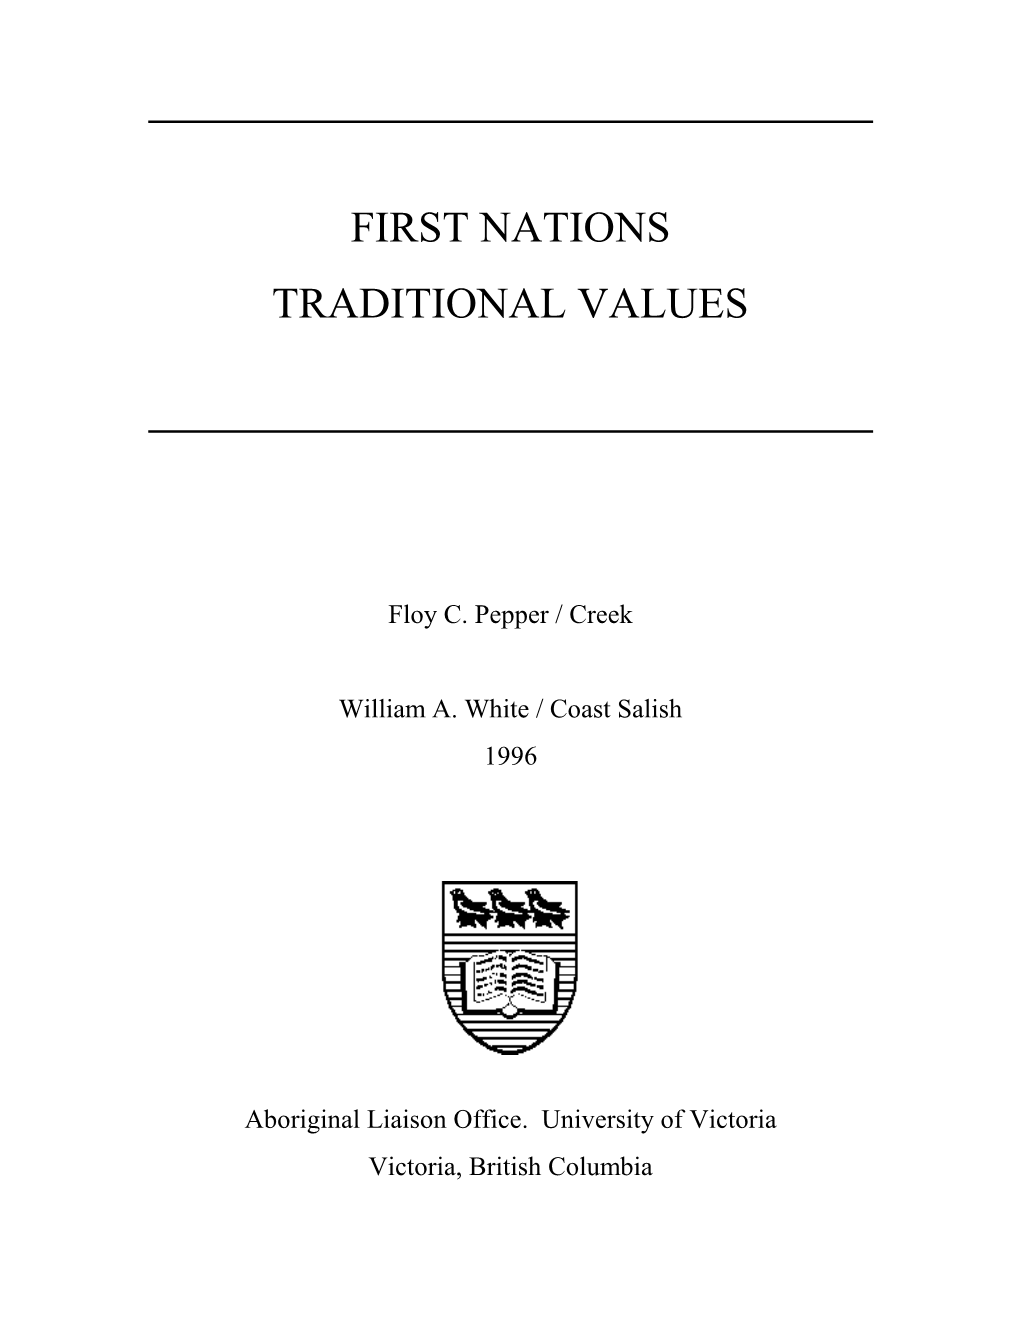 Traditional First Nations Values